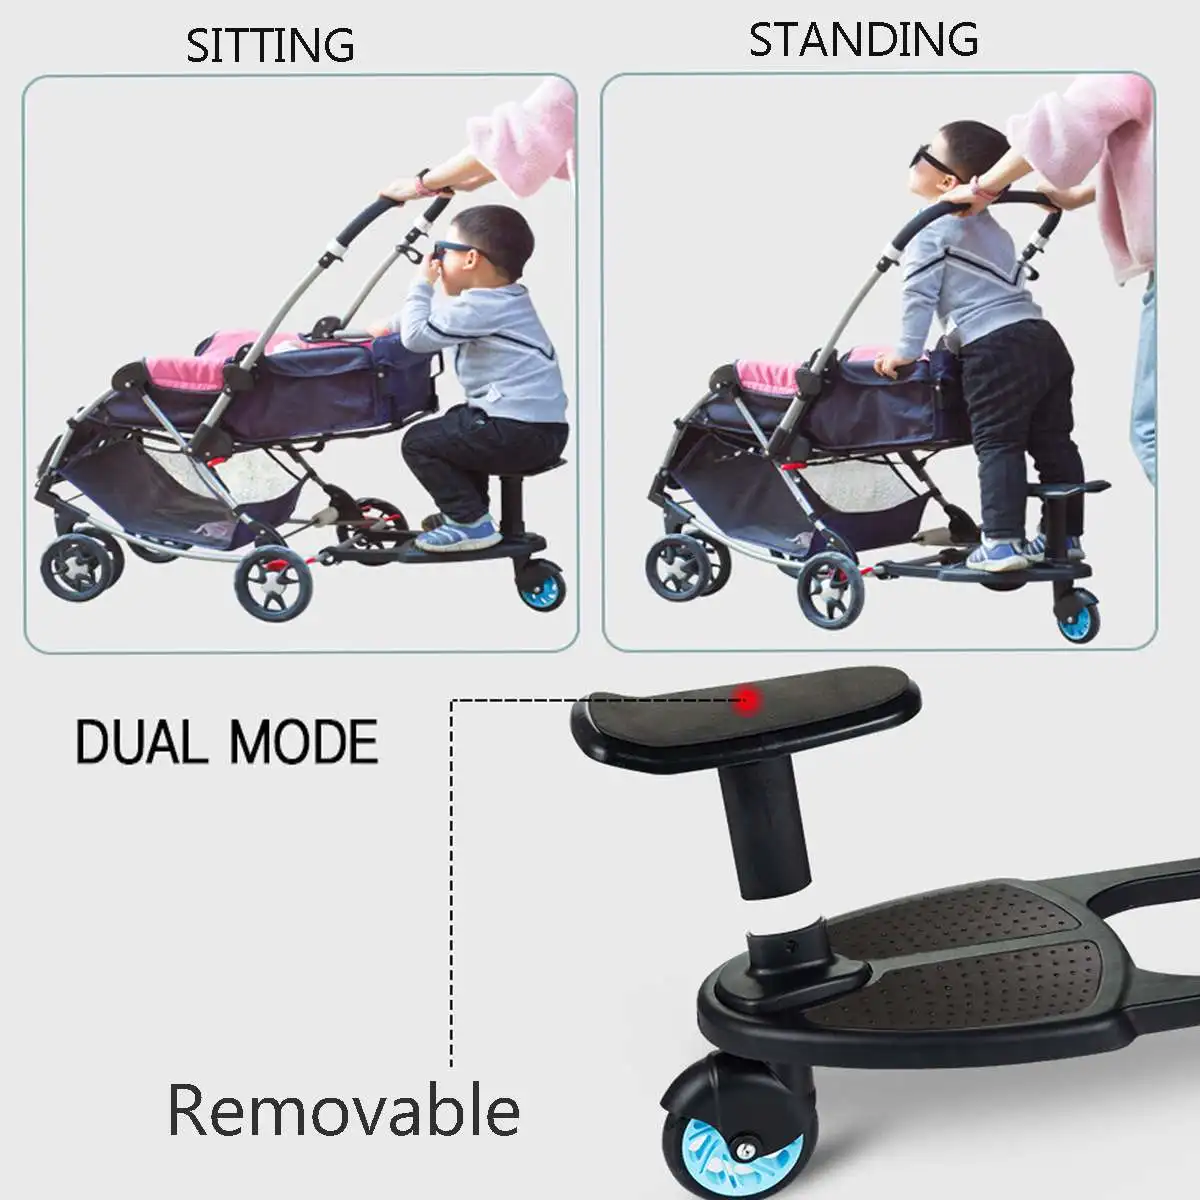 Baby Stroller Step Board Stopping Plate Twins Strollers Accessory Outdoor Activity Board Stroller Baby Seat Standing Plate